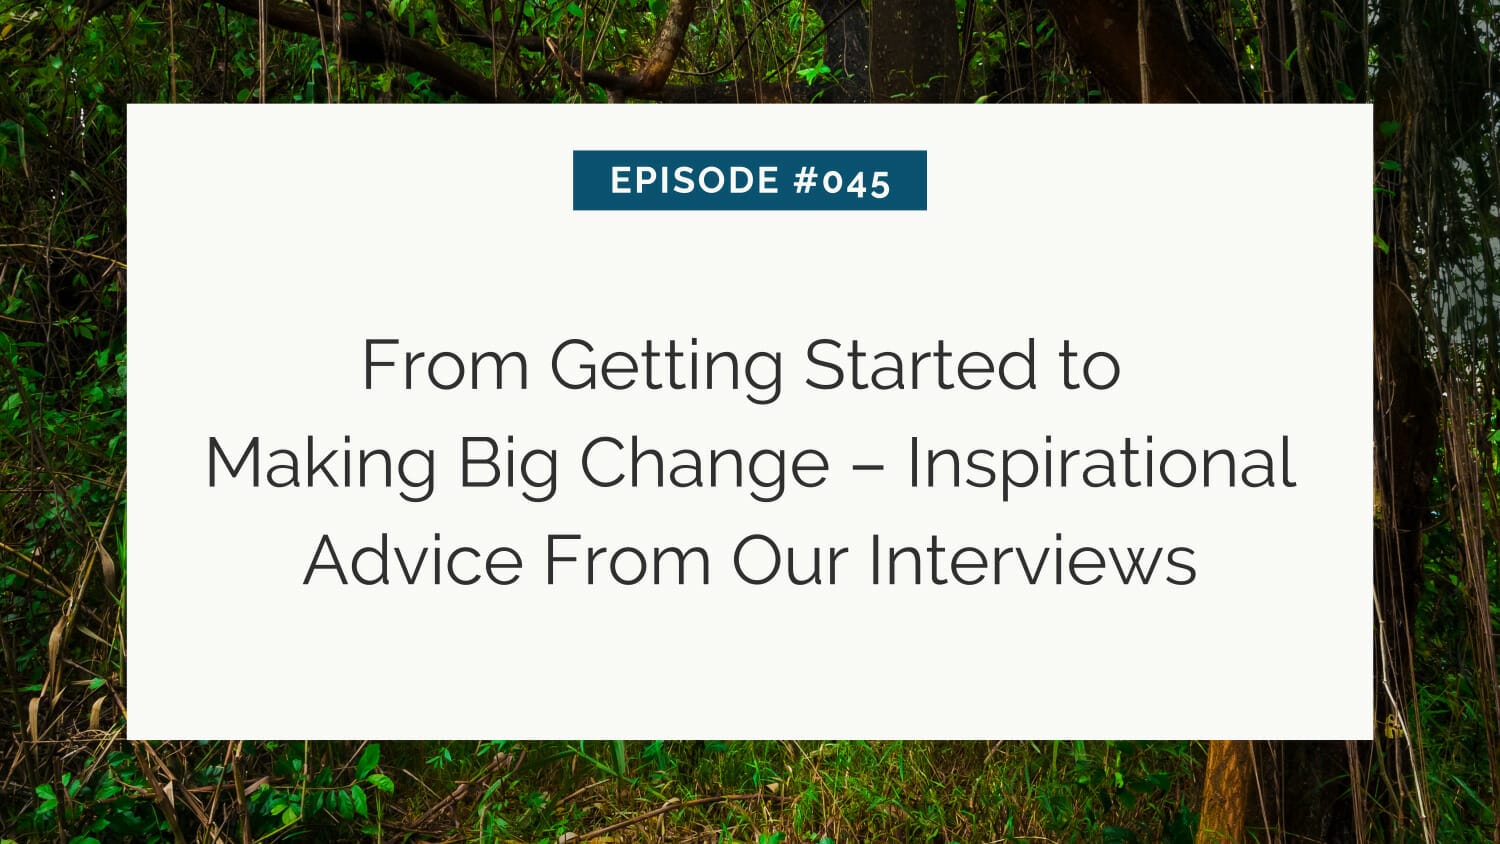 A promotional graphic for episode #045 titled "from getting started to making big change – inspirational advice from our interviews" against a forest background.